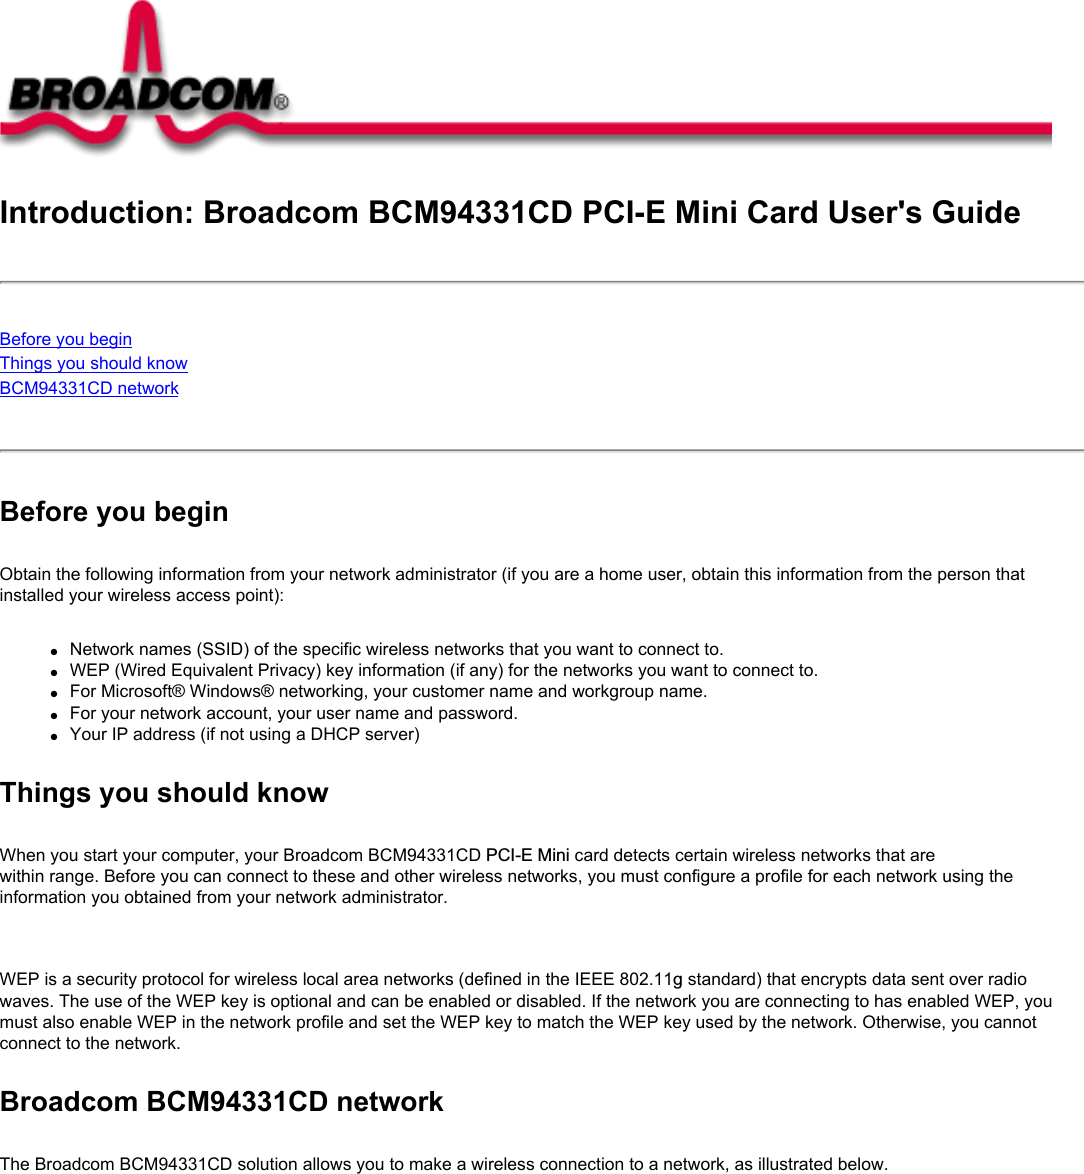 Introduction: Broadcom BCM94331CD PCI-E Mini Card User&apos;s GuideBefore you beginThings you should knowBCM94331CD network Before you beginObtain the following information from your network administrator (if you are a home user, obtain this information from the person that installed your wireless access point):●     Network names (SSID) of the specific wireless networks that you want to connect to.●     WEP (Wired Equivalent Privacy) key information (if any) for the networks you want to connect to.●     For Microsoft® Windows® networking, your customer name and workgroup name.●     For your network account, your user name and password.●     Your IP address (if not using a DHCP server)Things you should knowWhen you start your computer, your Broadcom BCM94331CD PCI-E Mini card detects certain wireless networks that are within range. Before you can connect to these and other wireless networks, you must configure a profile for each network using the information you obtained from your network administrator.   WEP is a security protocol for wireless local area networks (defined in the IEEE 802.11g standard) that encrypts data sent over radio waves. The use of the WEP key is optional and can be enabled or disabled. If the network you are connecting to has enabled WEP, you must also enable WEP in the network profile and set the WEP key to match the WEP key used by the network. Otherwise, you cannot connect to the network.Broadcom BCM94331CD networkThe Broadcom BCM94331CD solution allows you to make a wireless connection to a network, as illustrated below.